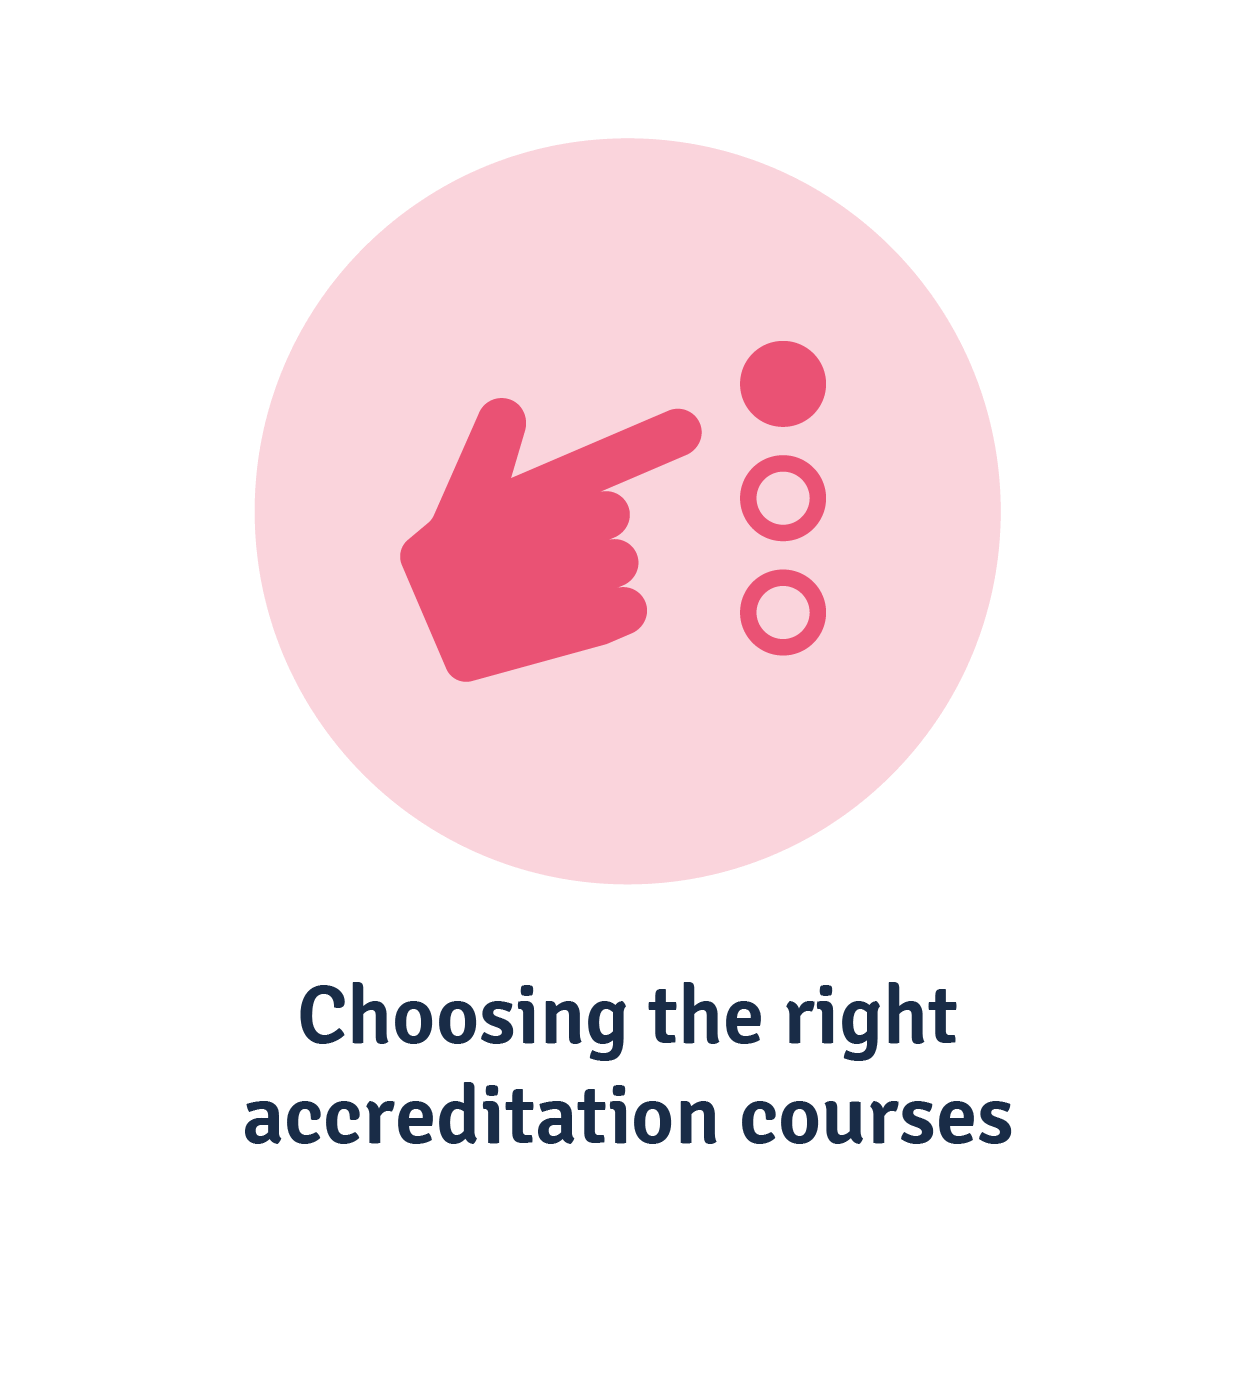 How to choose the right accreditation courses